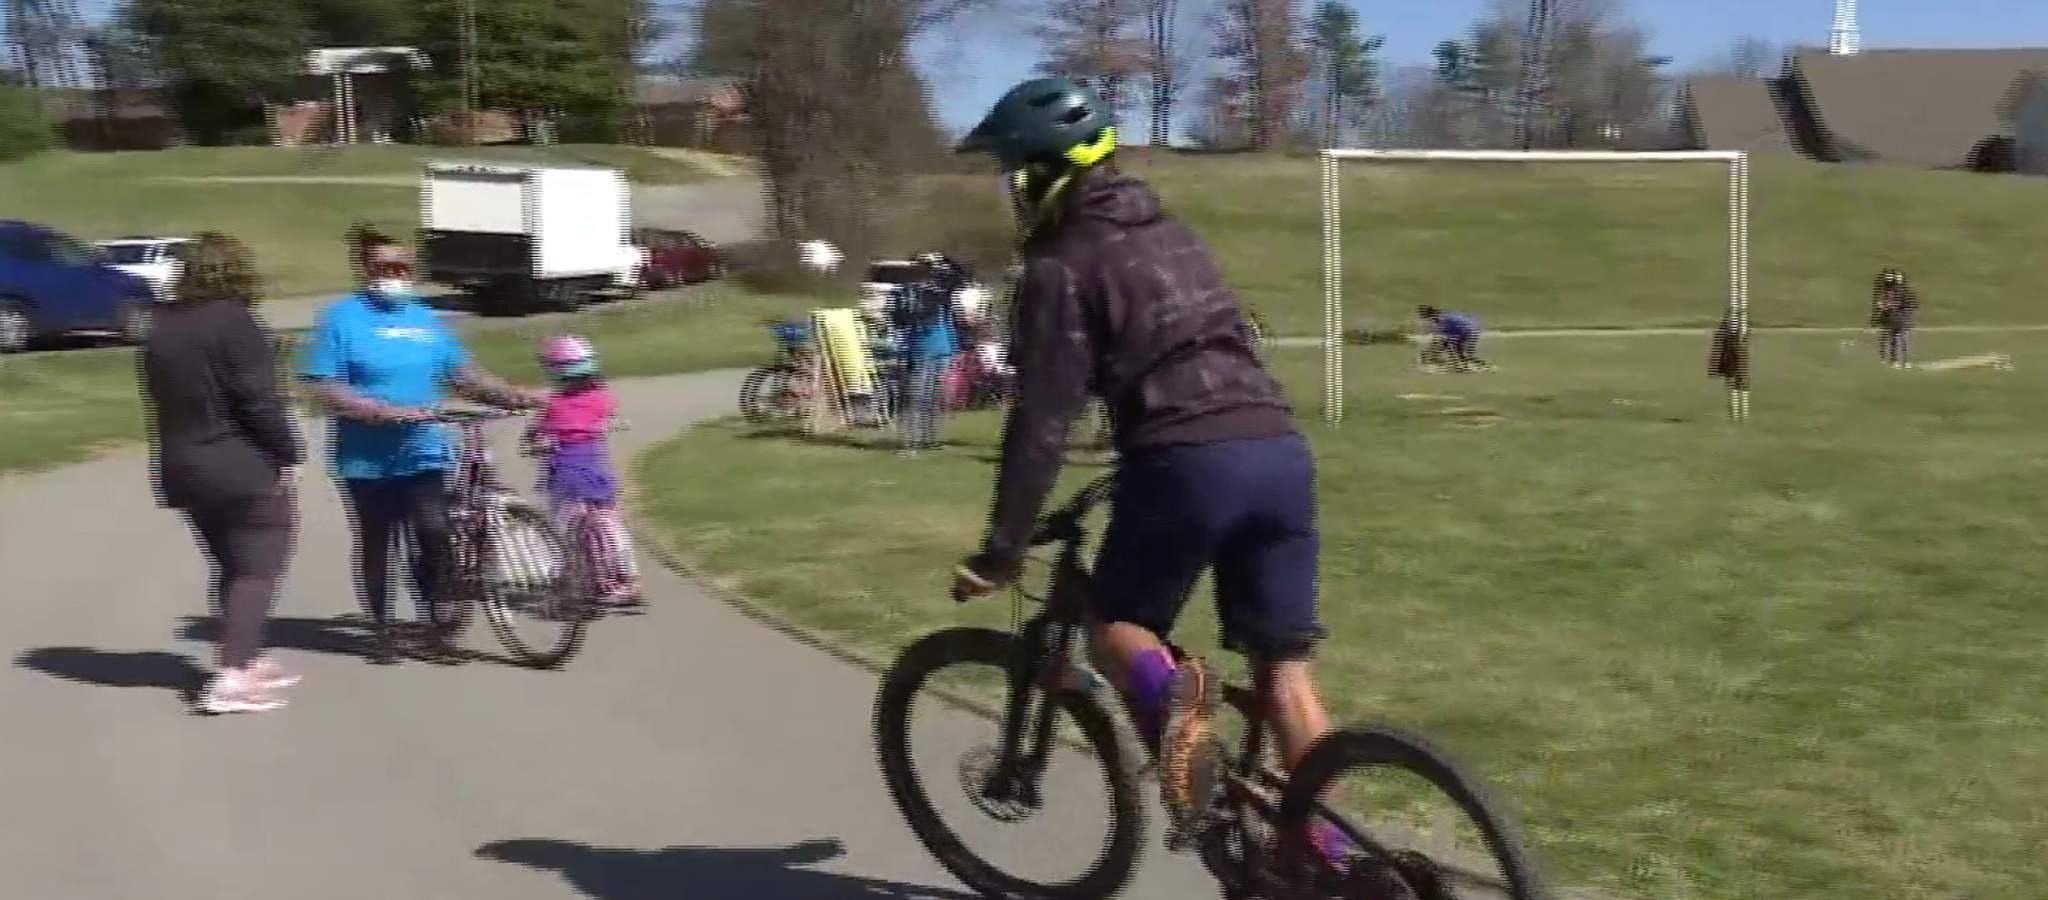 Outdoor event in Roanoke features free helmets, lessons on bike safety